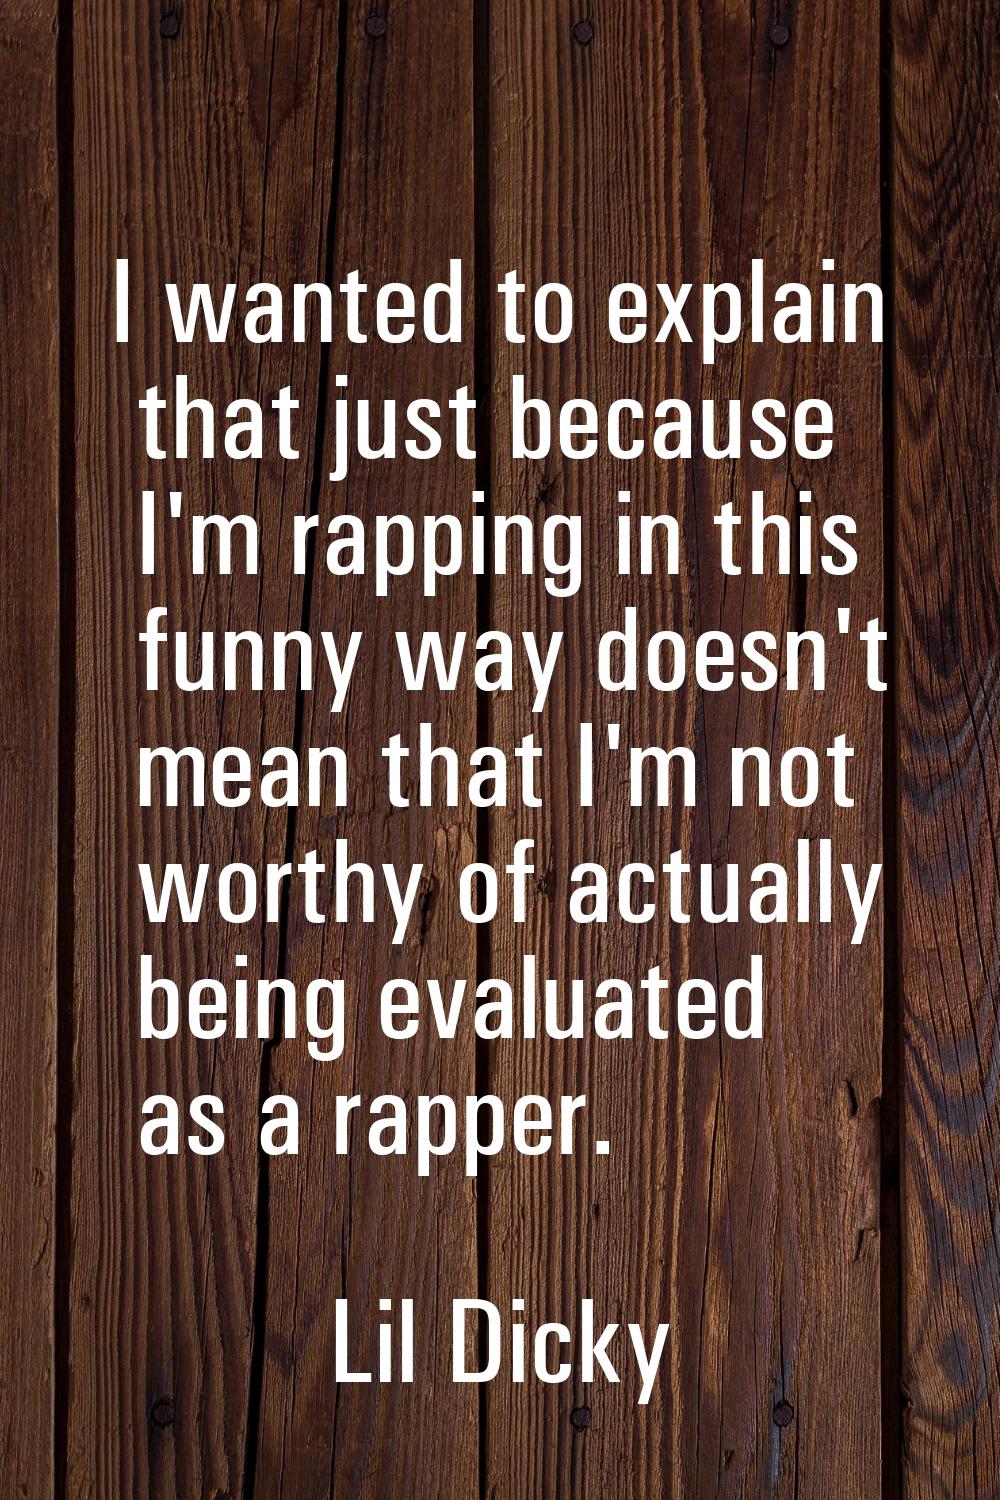 I wanted to explain that just because I'm rapping in this funny way doesn't mean that I'm not worth